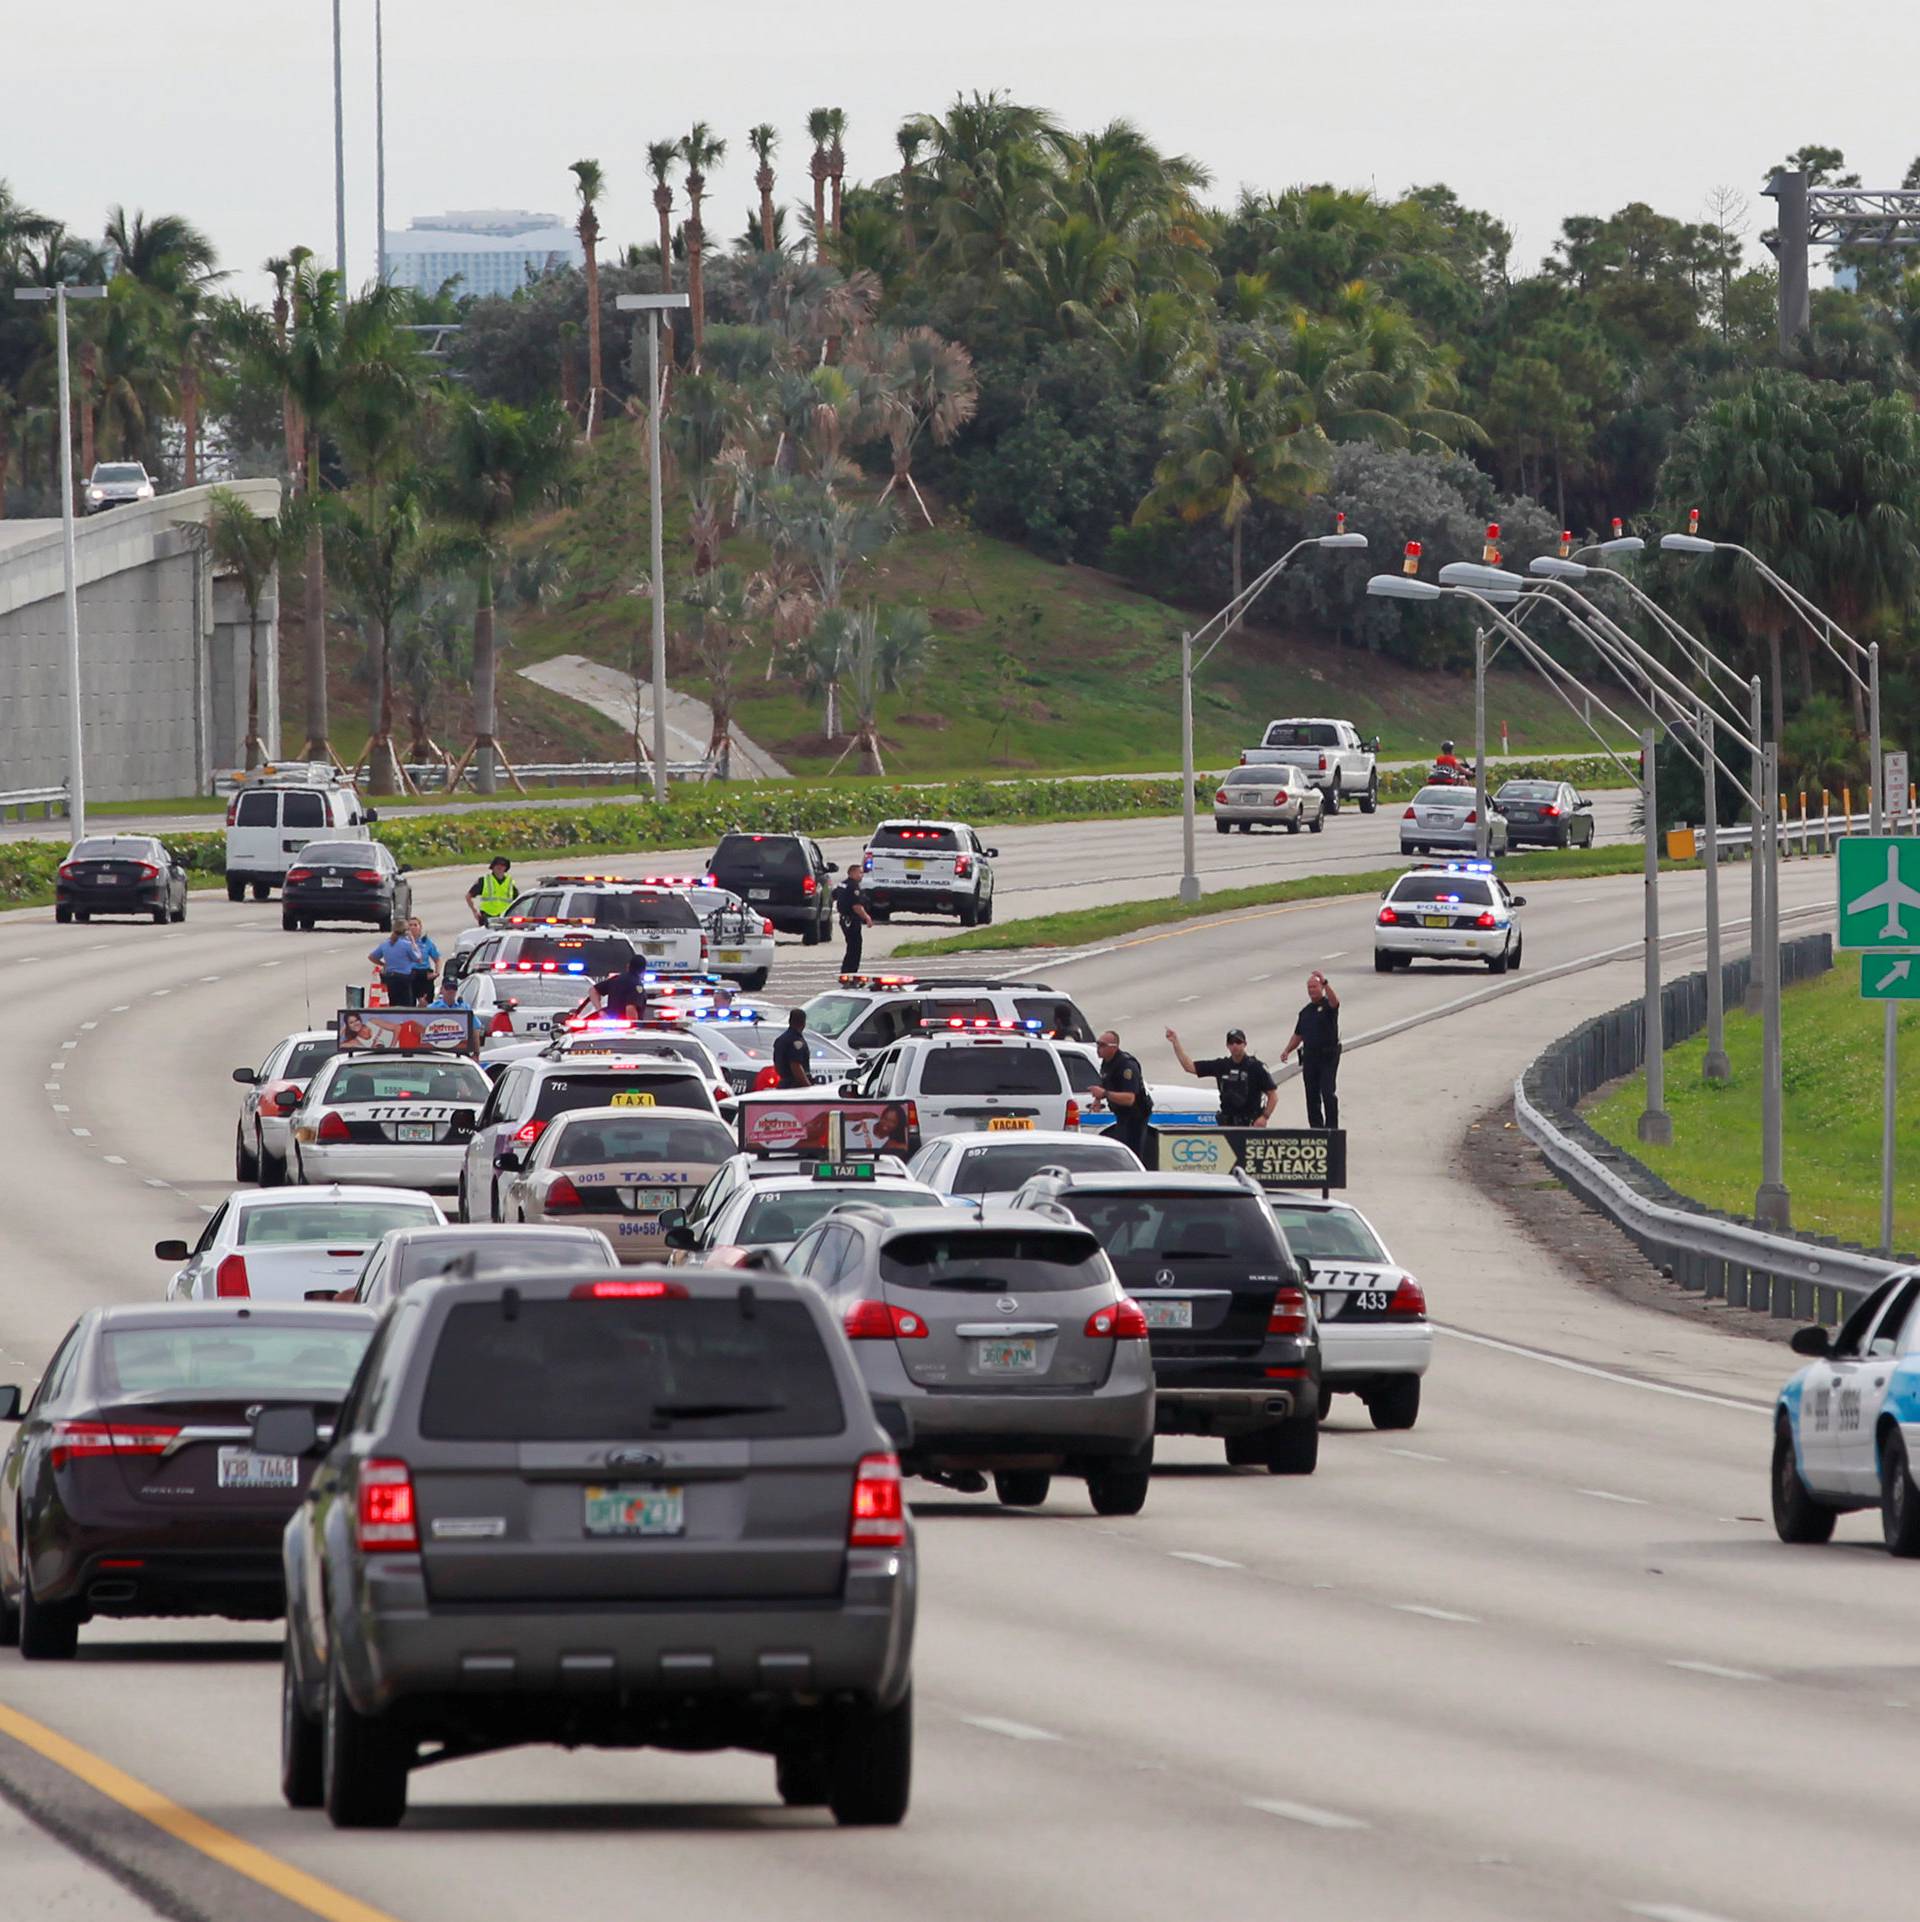 Law enforcement block an entrance to the airport following a shooting incident at Fort Lauderdale-Hollywood International Airport in Fort Lauderdale, Florida